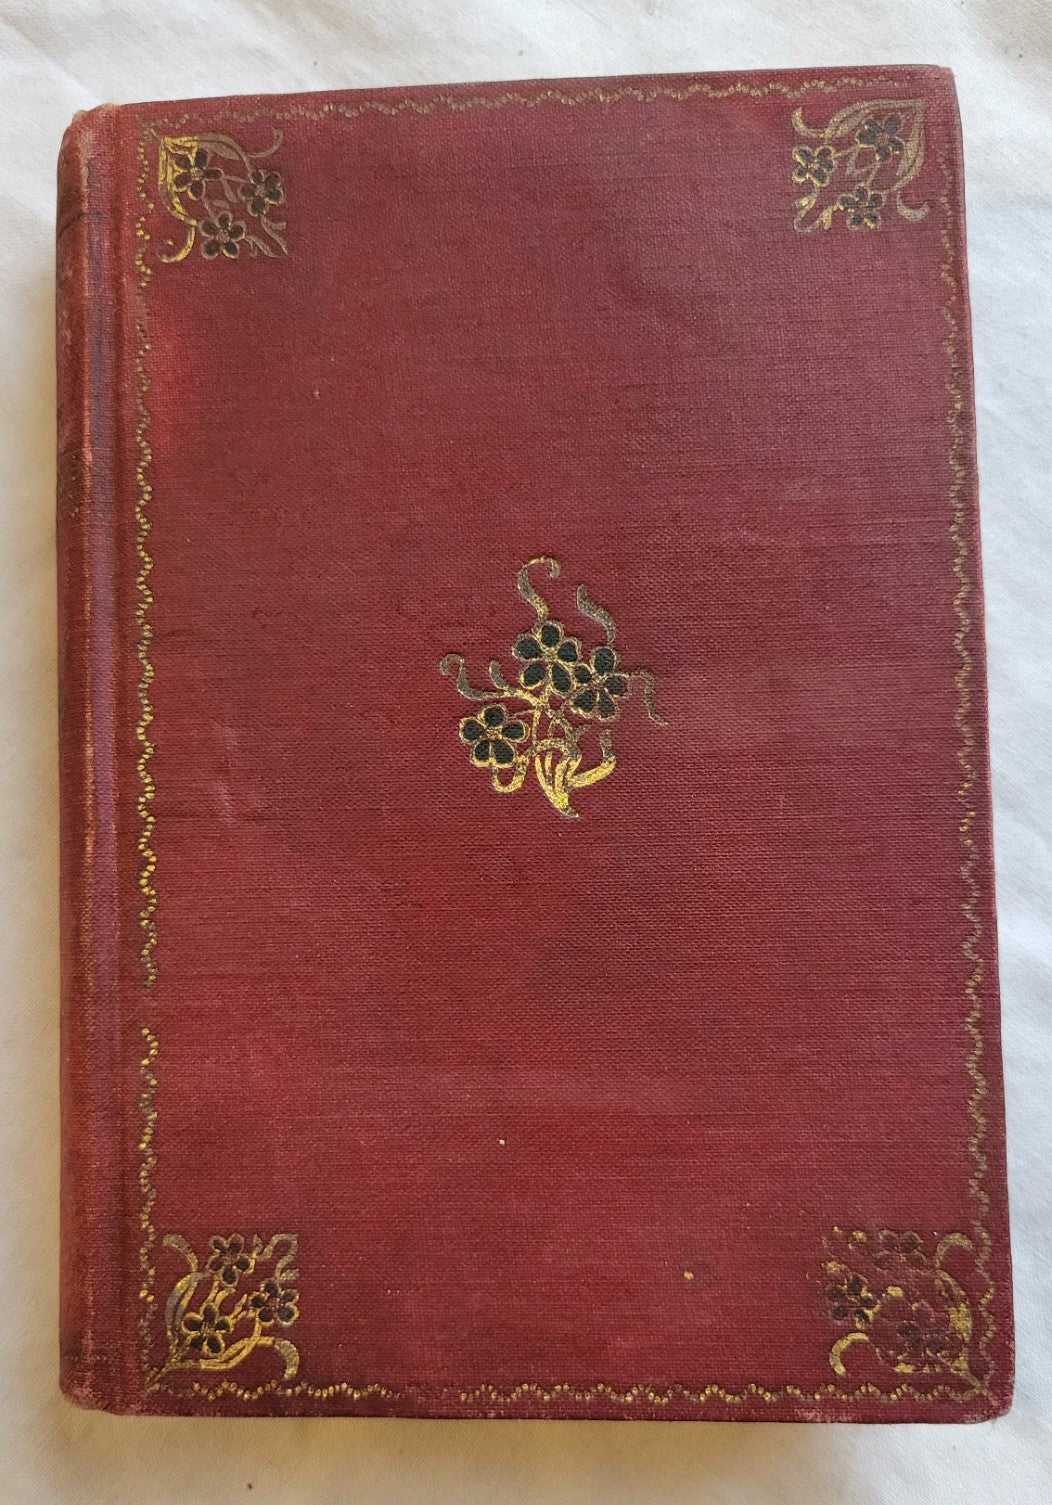 "As You Like It" by William Shakespeare, published by E. A. Lawson Company Publishers, printing date unknown but believed to be around the late 1800s.  View of front cover.